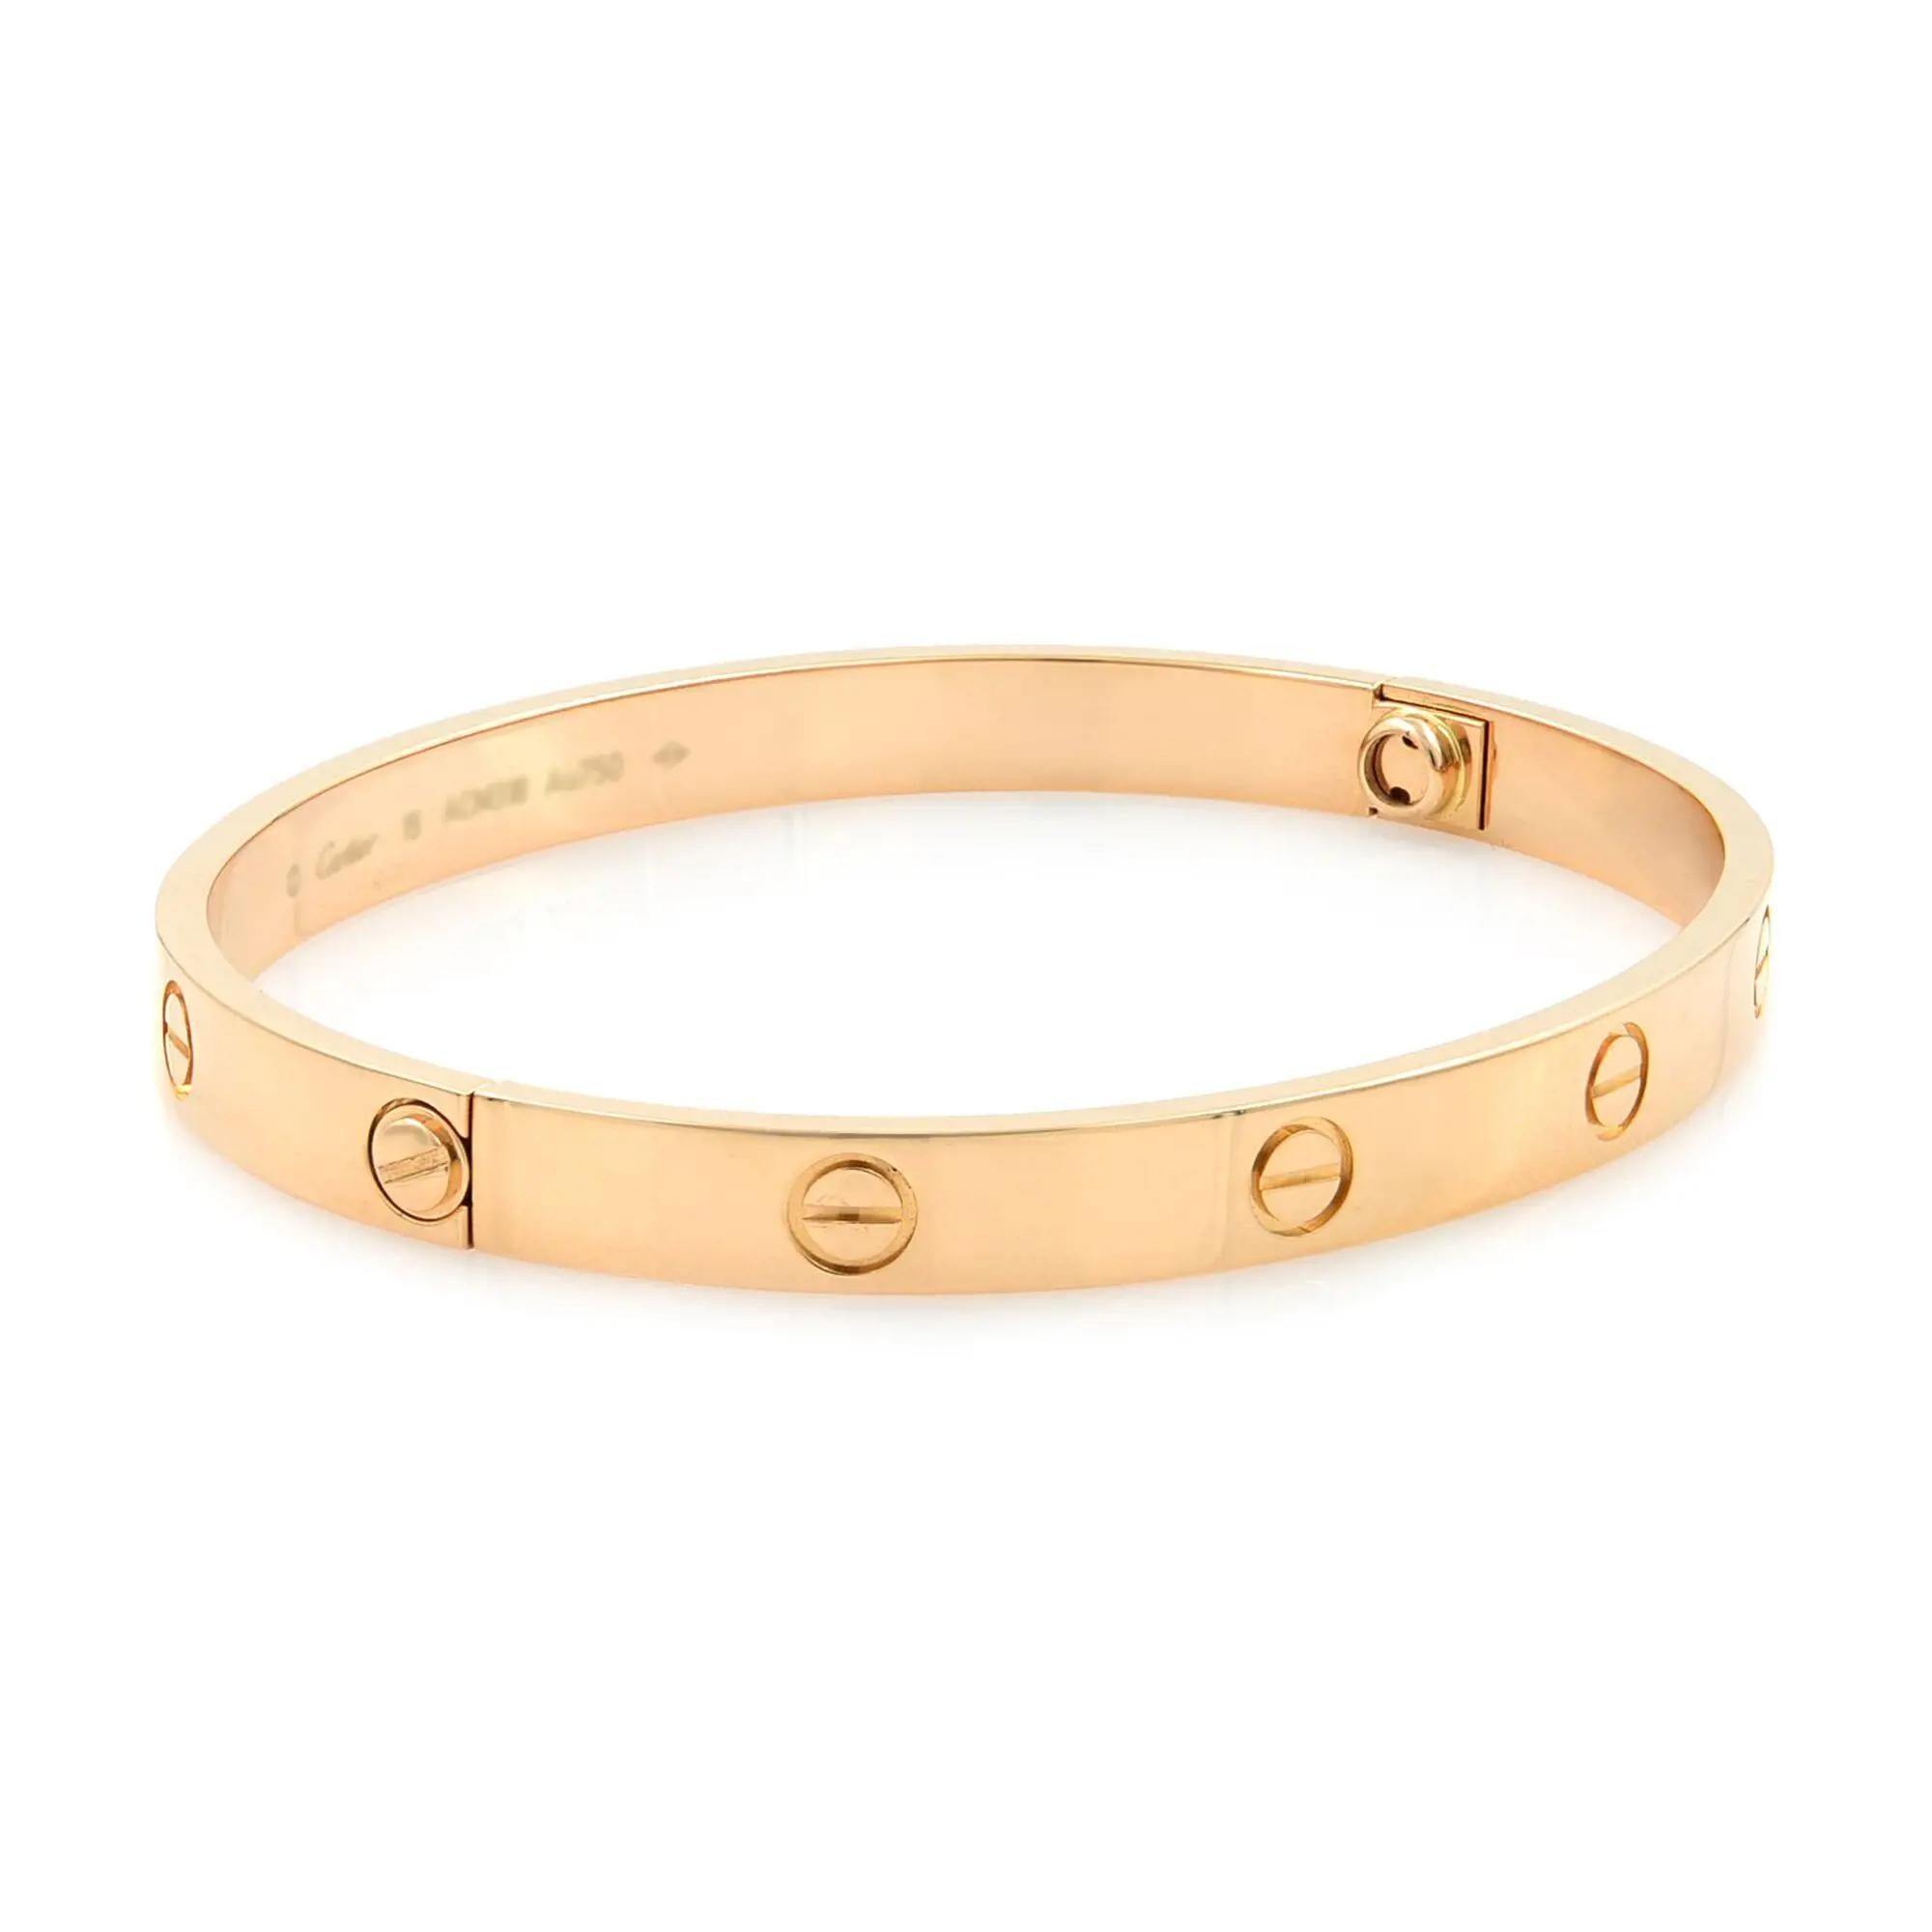 Cartier classic Love bracelet bangle in size 19. Crafted in 18k rose gold. Width: 6.1mm. New style screw system. Excellent pre-owned condition. Looks unworn. Recently got polished. Comes with a screw driver, travel pouch, polishing invoice from